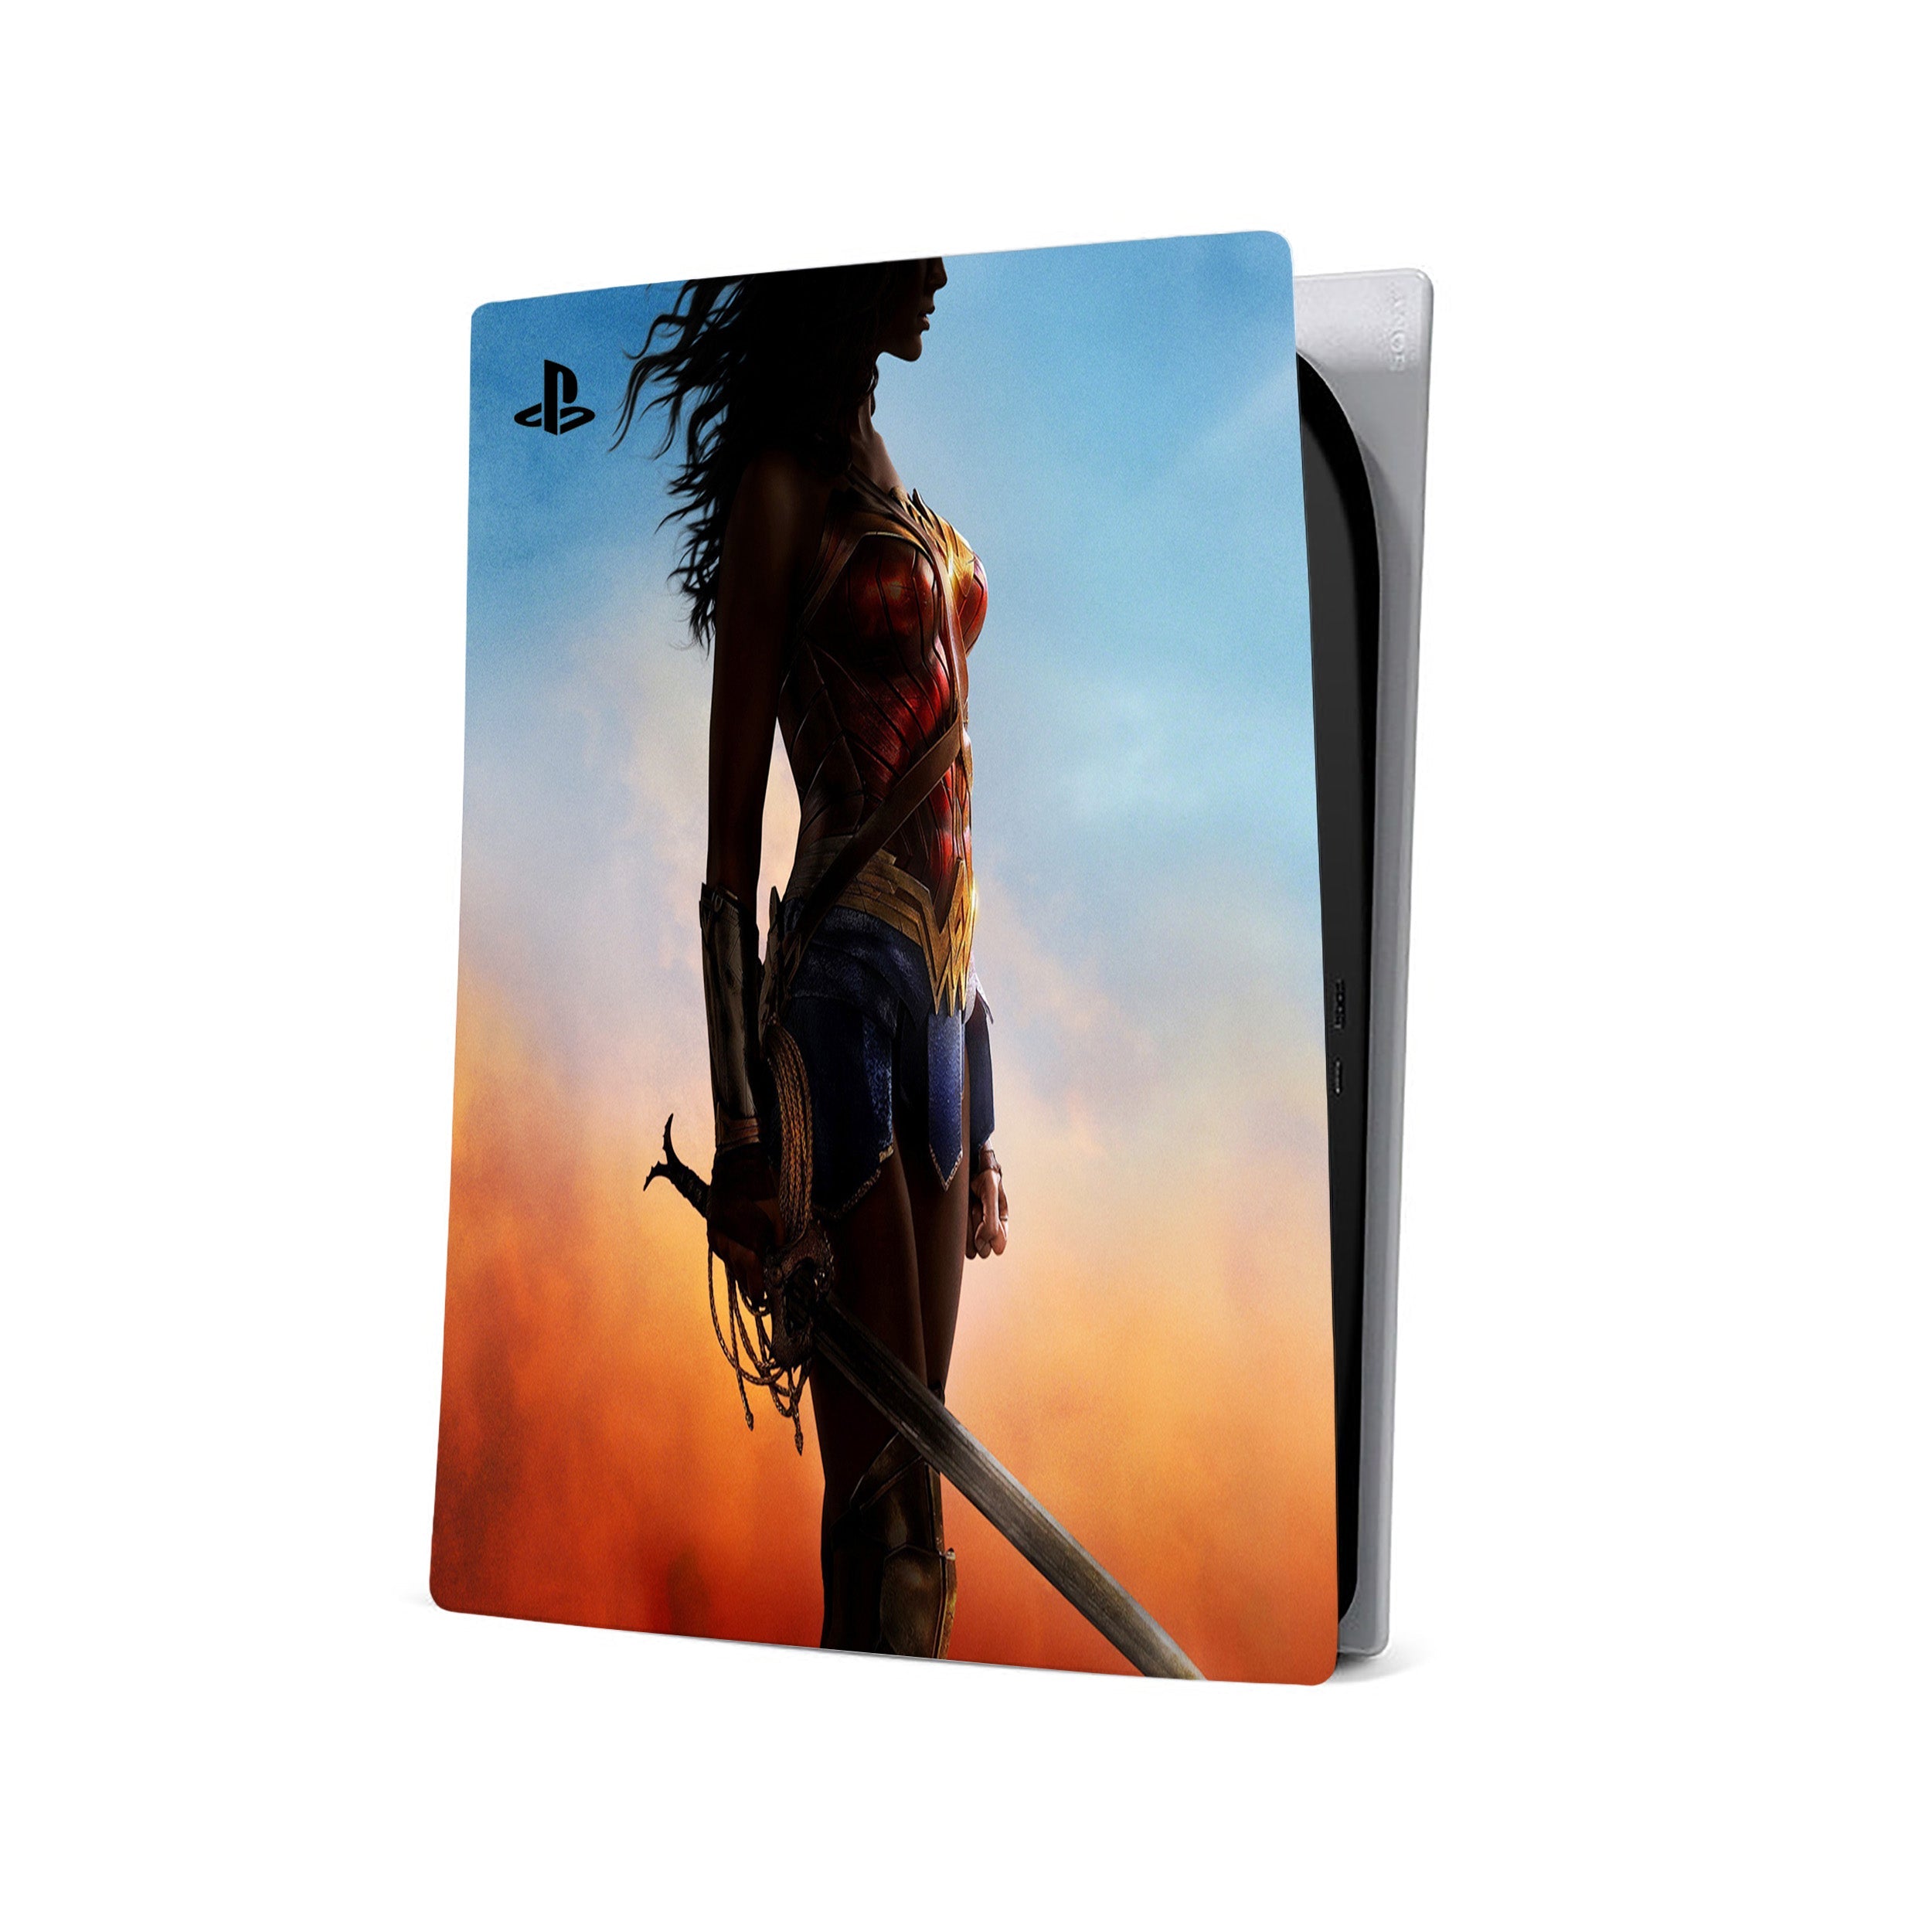 A video game skin featuring a DC Wonder Woman design for the PS5.